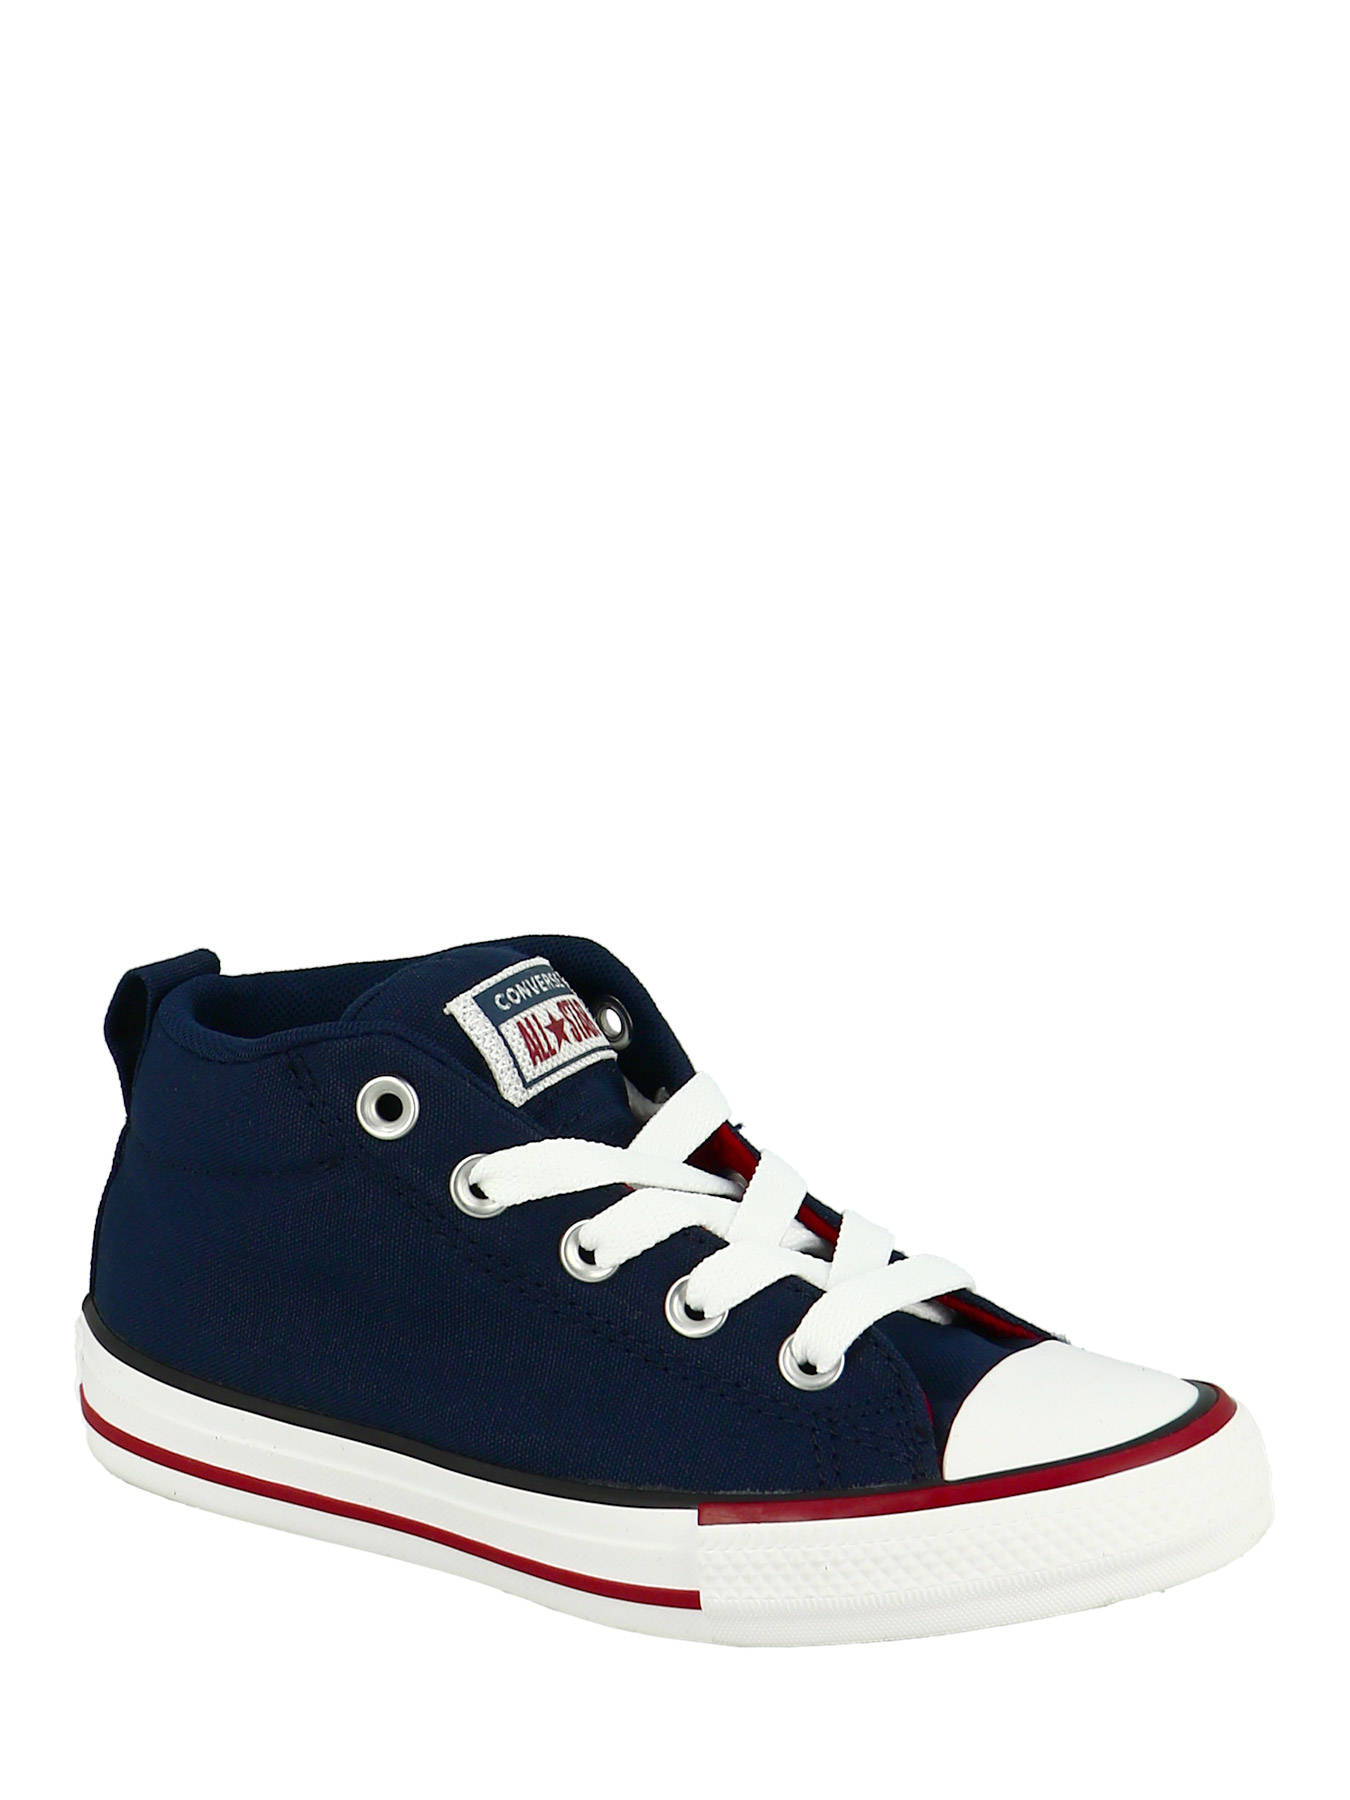 converse all star mid